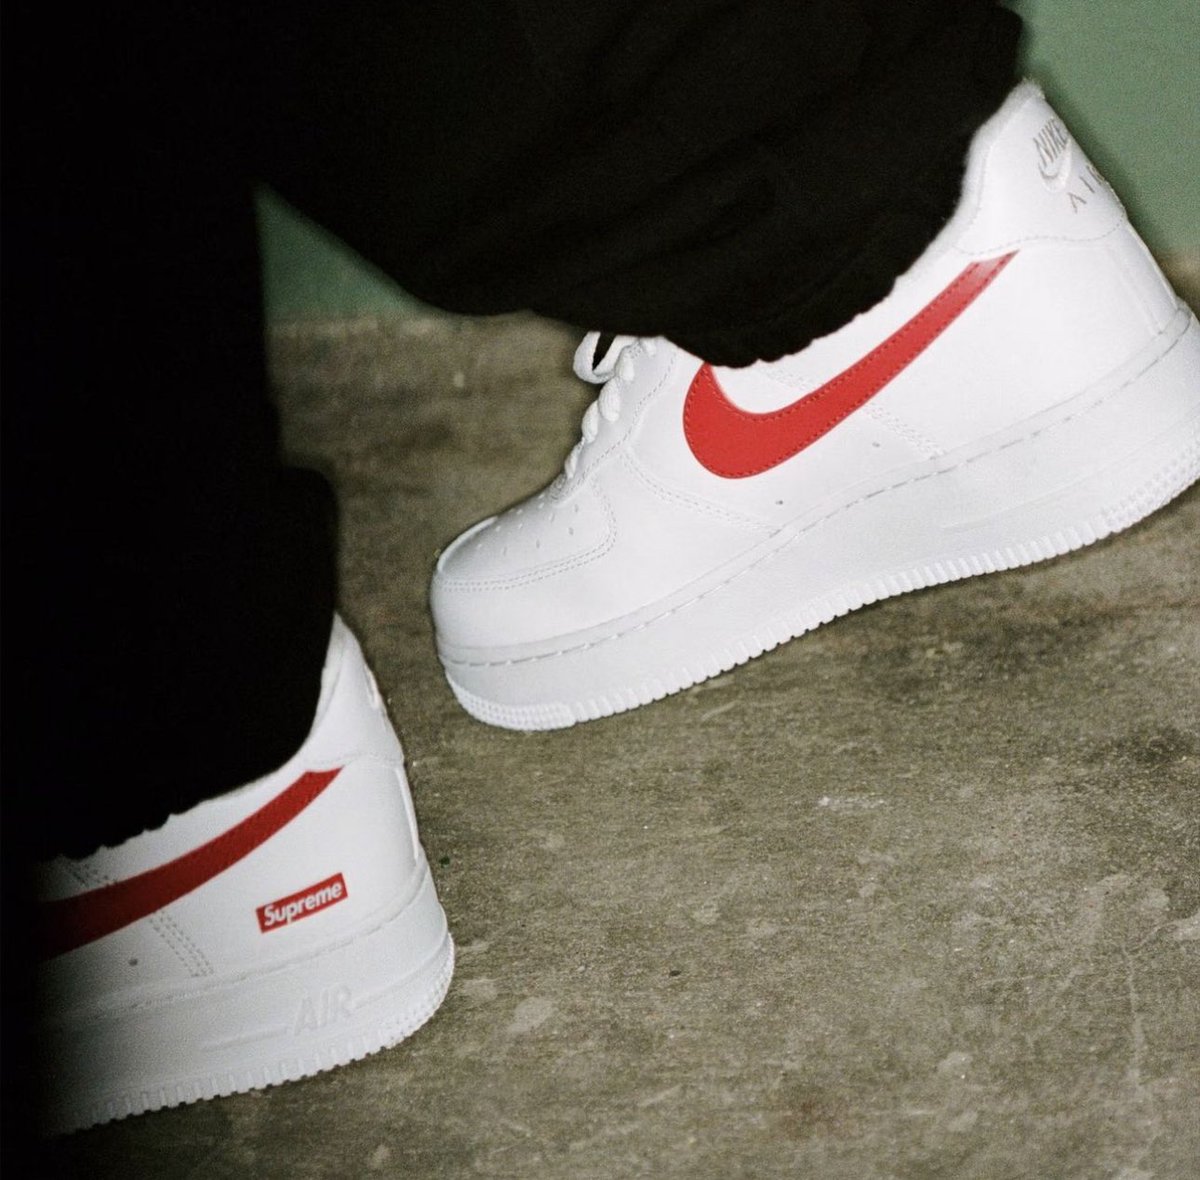 Supreme x Nike Air Force 1 'Chinese Red'

An exclusive Supreme x Nike AF1 will be releasing in Supreme Shanghai store only soon